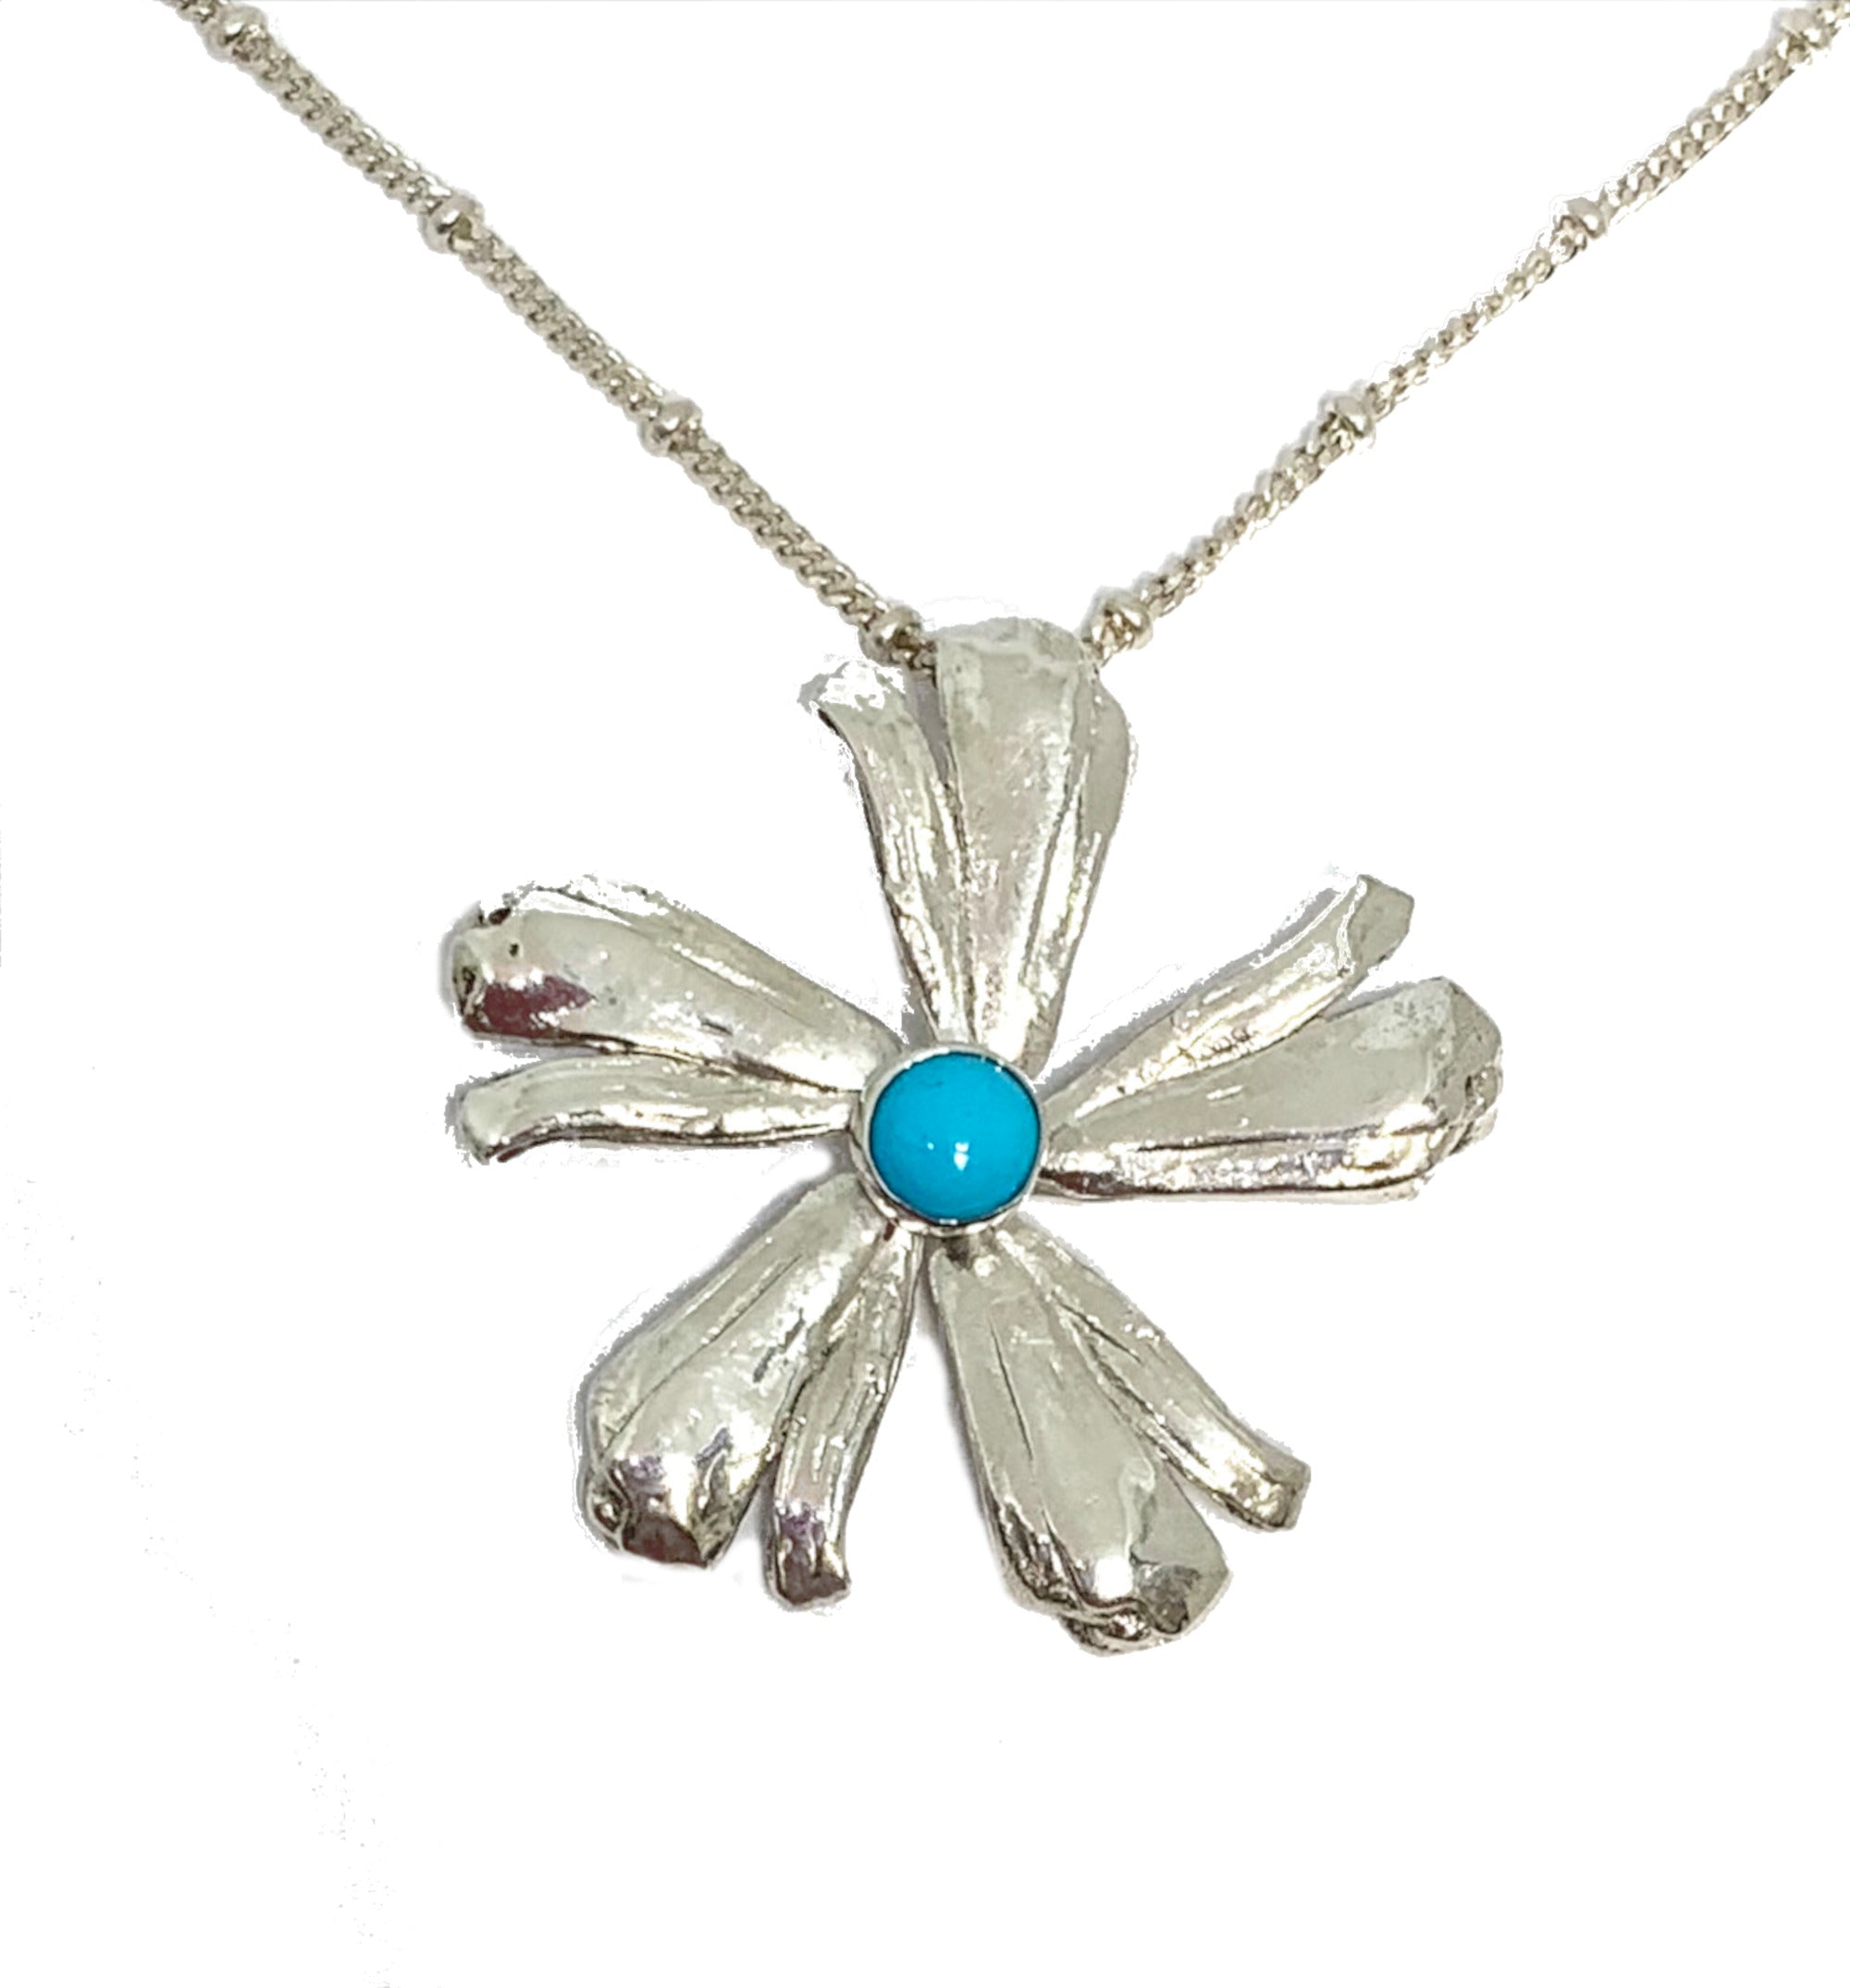 Flower Power Pendant with Sleeping Beauty Turquoise in Sterling